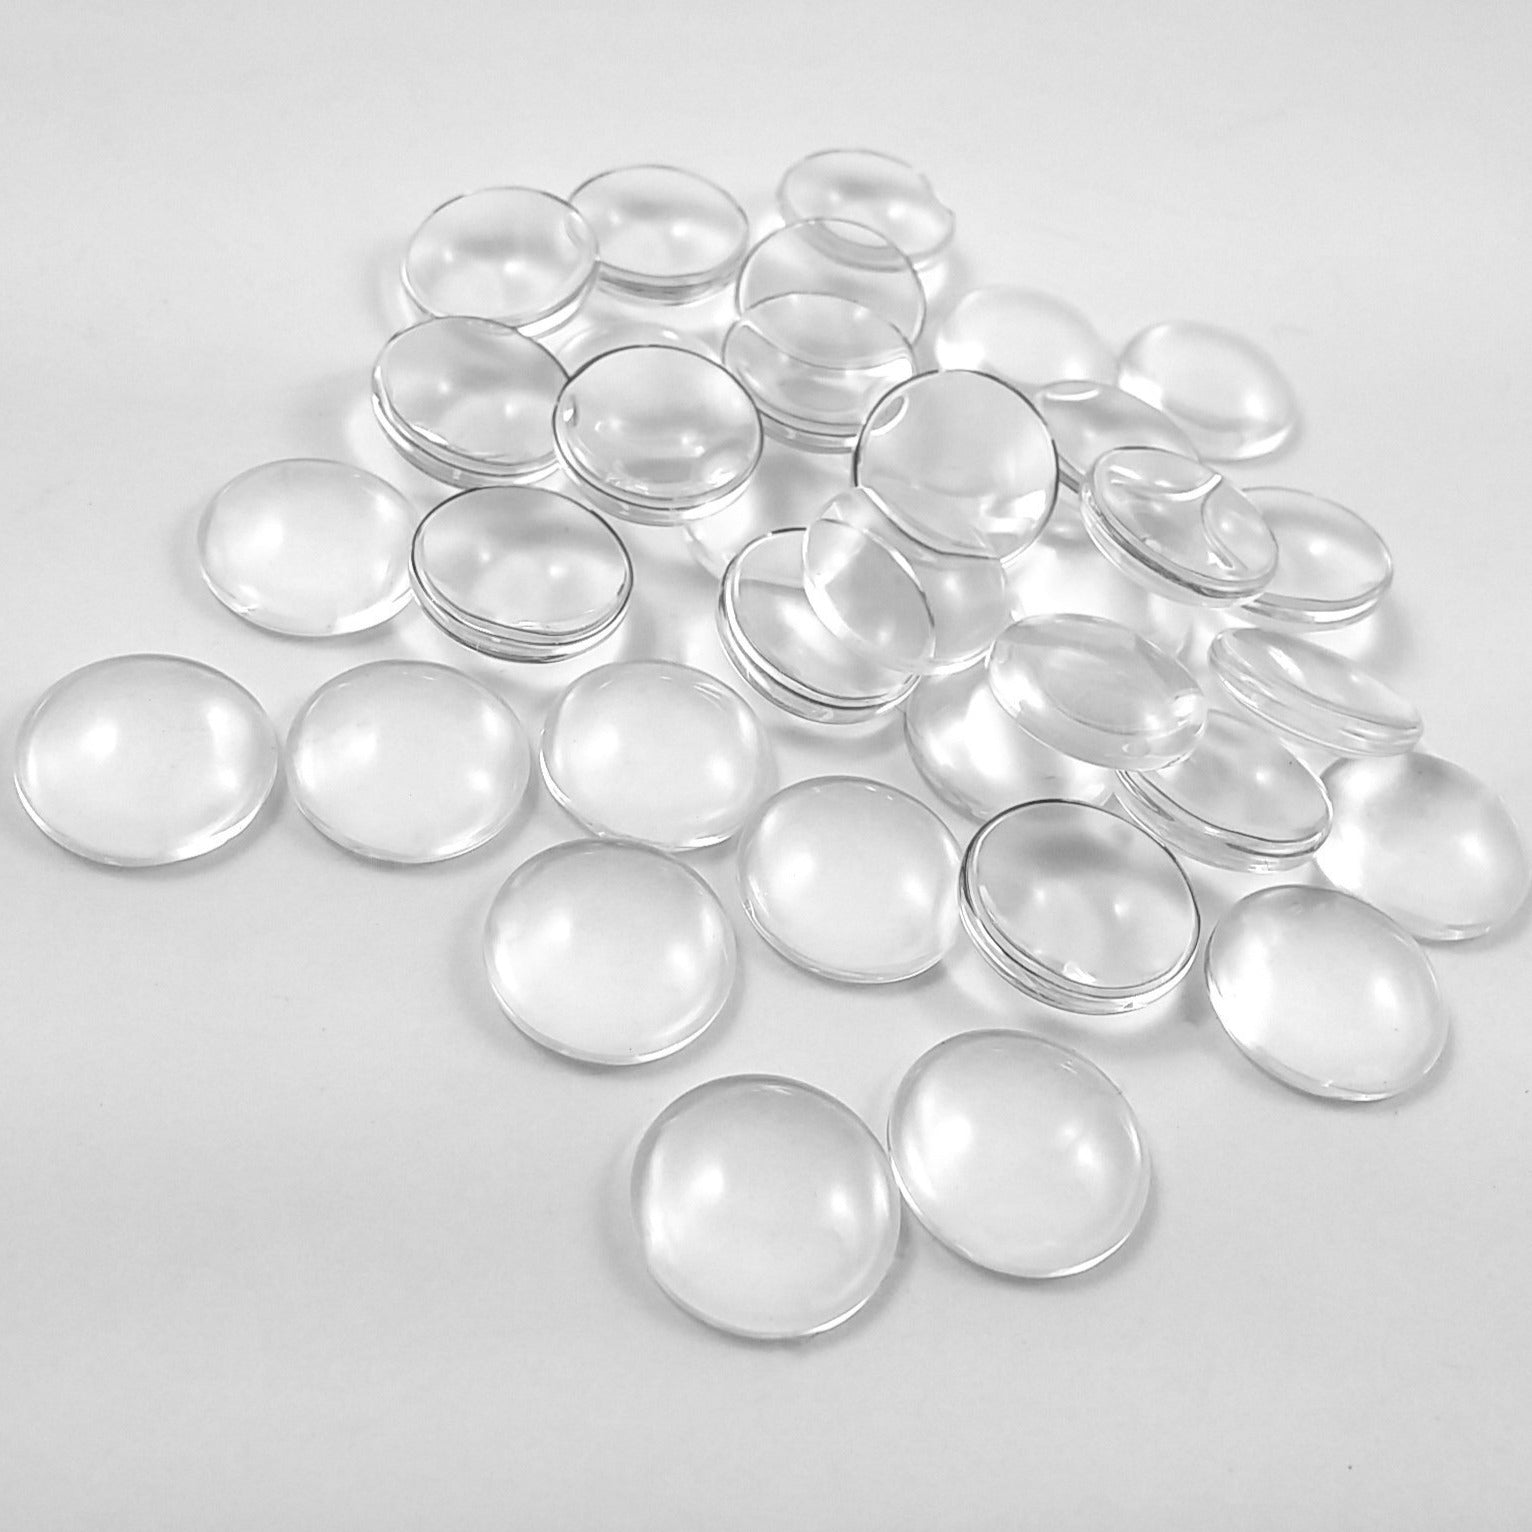 Glass Cabochons 30x40 mm for Jewelry Making 50 PCS Oval Cabochon with Flat  Backs Glass Dome Tiles Clear Cameo for… 